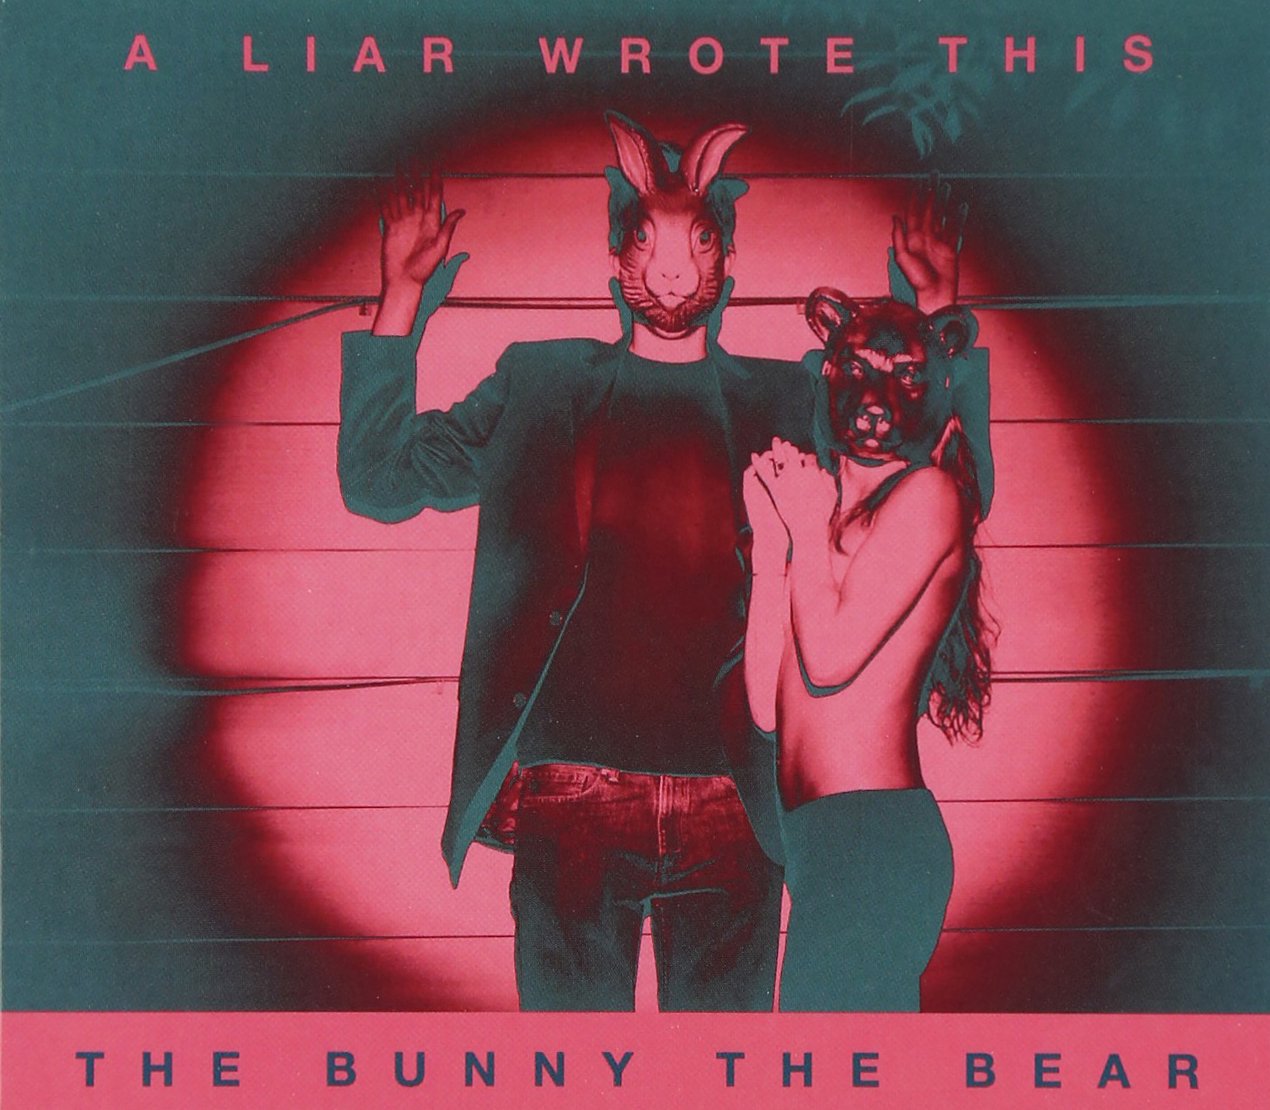 Bunny The Bear- Liar Wrote This